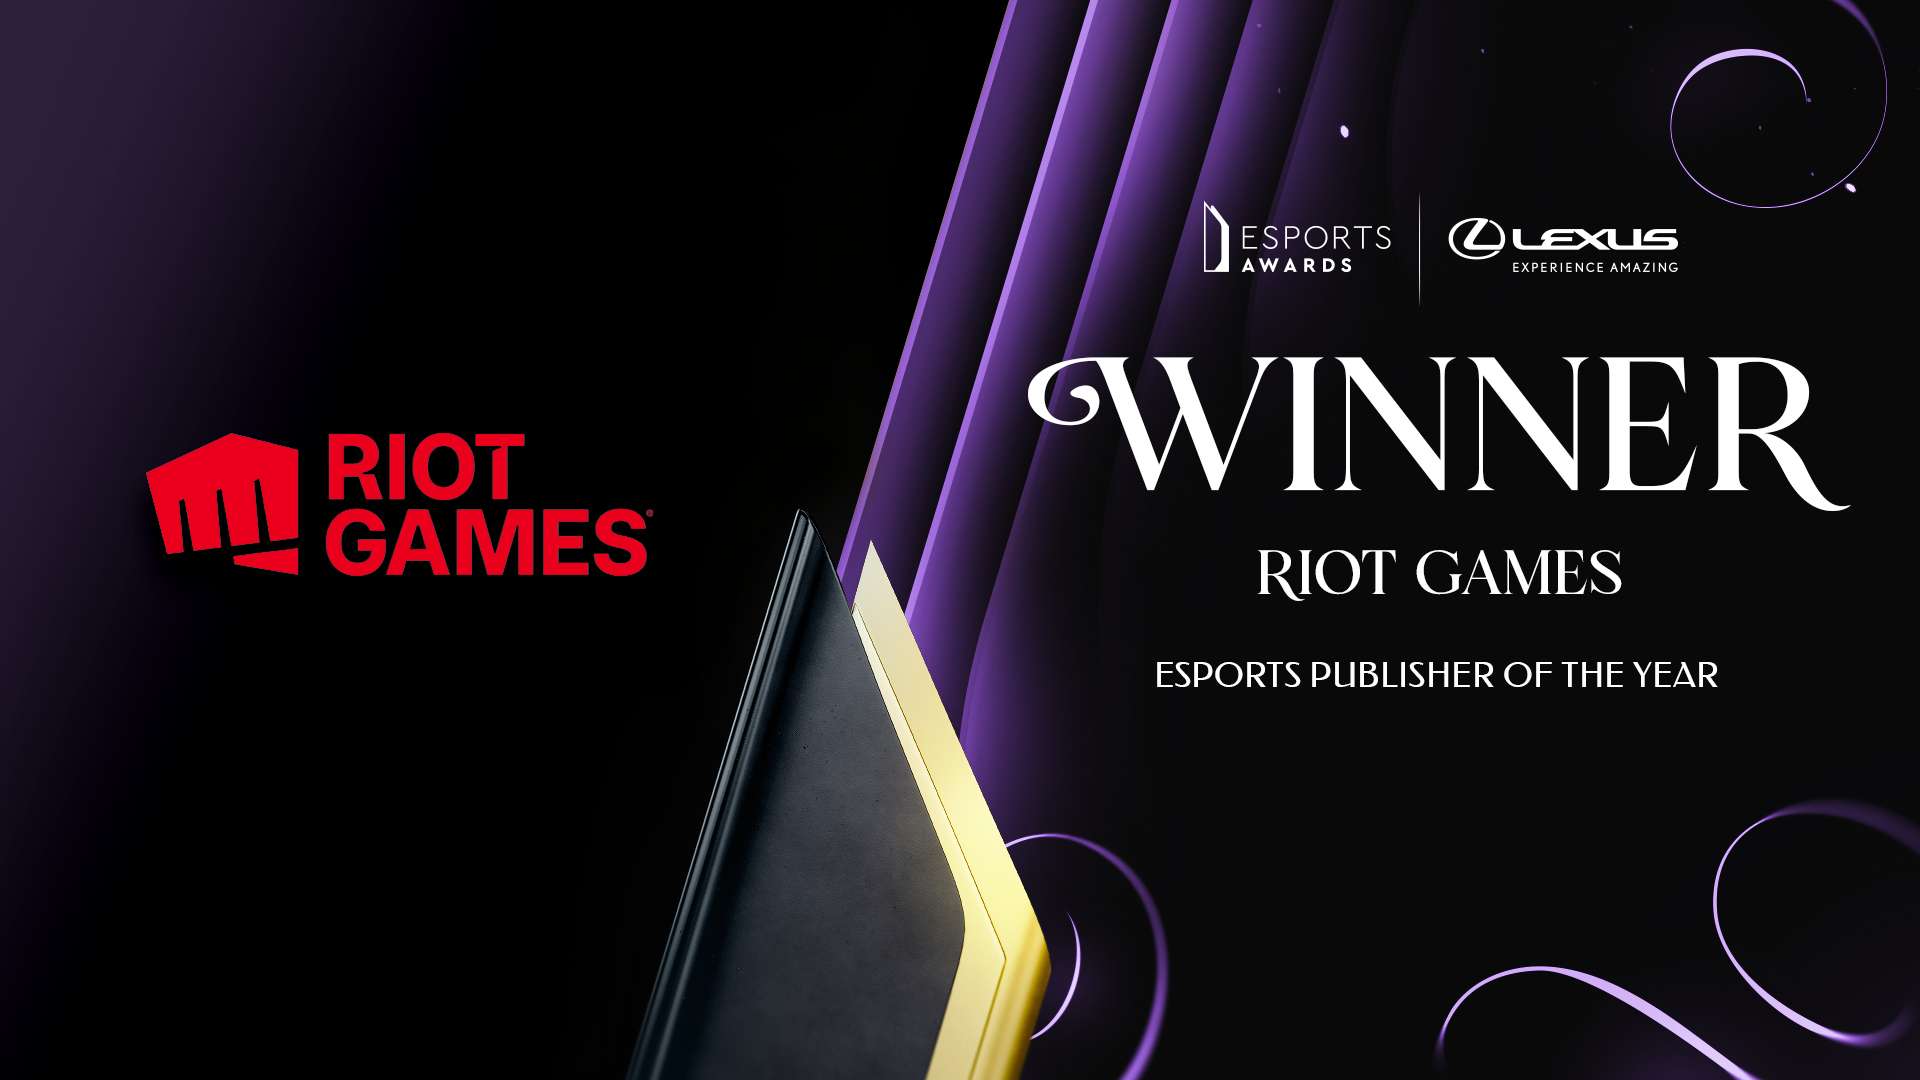 Esports Publisher of the Year thuộc về Riot Games.